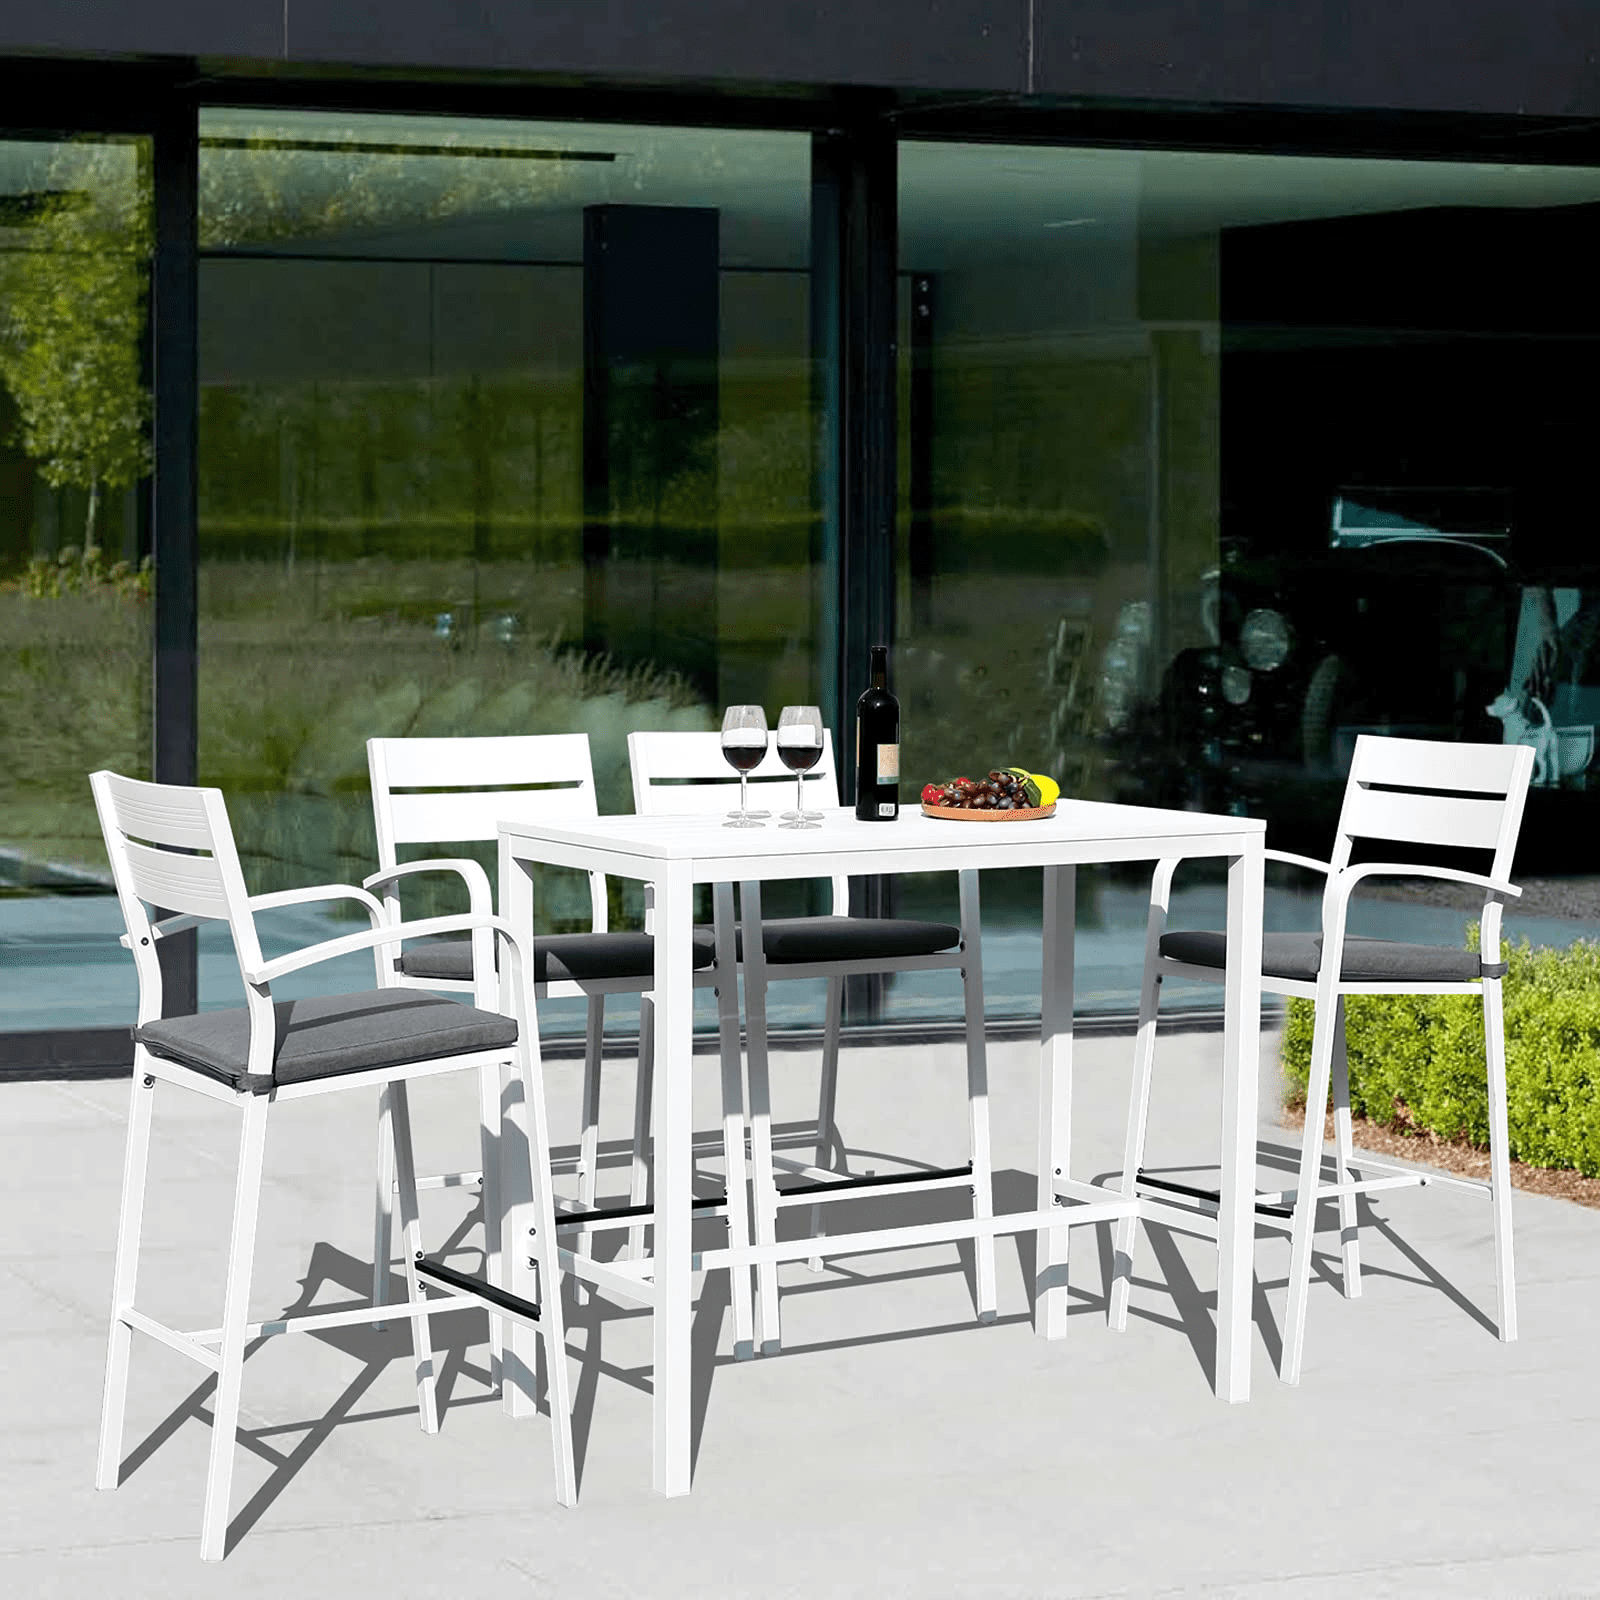 Dining Bistro Pub Set Soleil Jardin Outdoor Aluminum 5-Piece Bar Set Patio Bar Height Chairs with Cushion & Slatted High Top Table for Backyard Garden Pool White